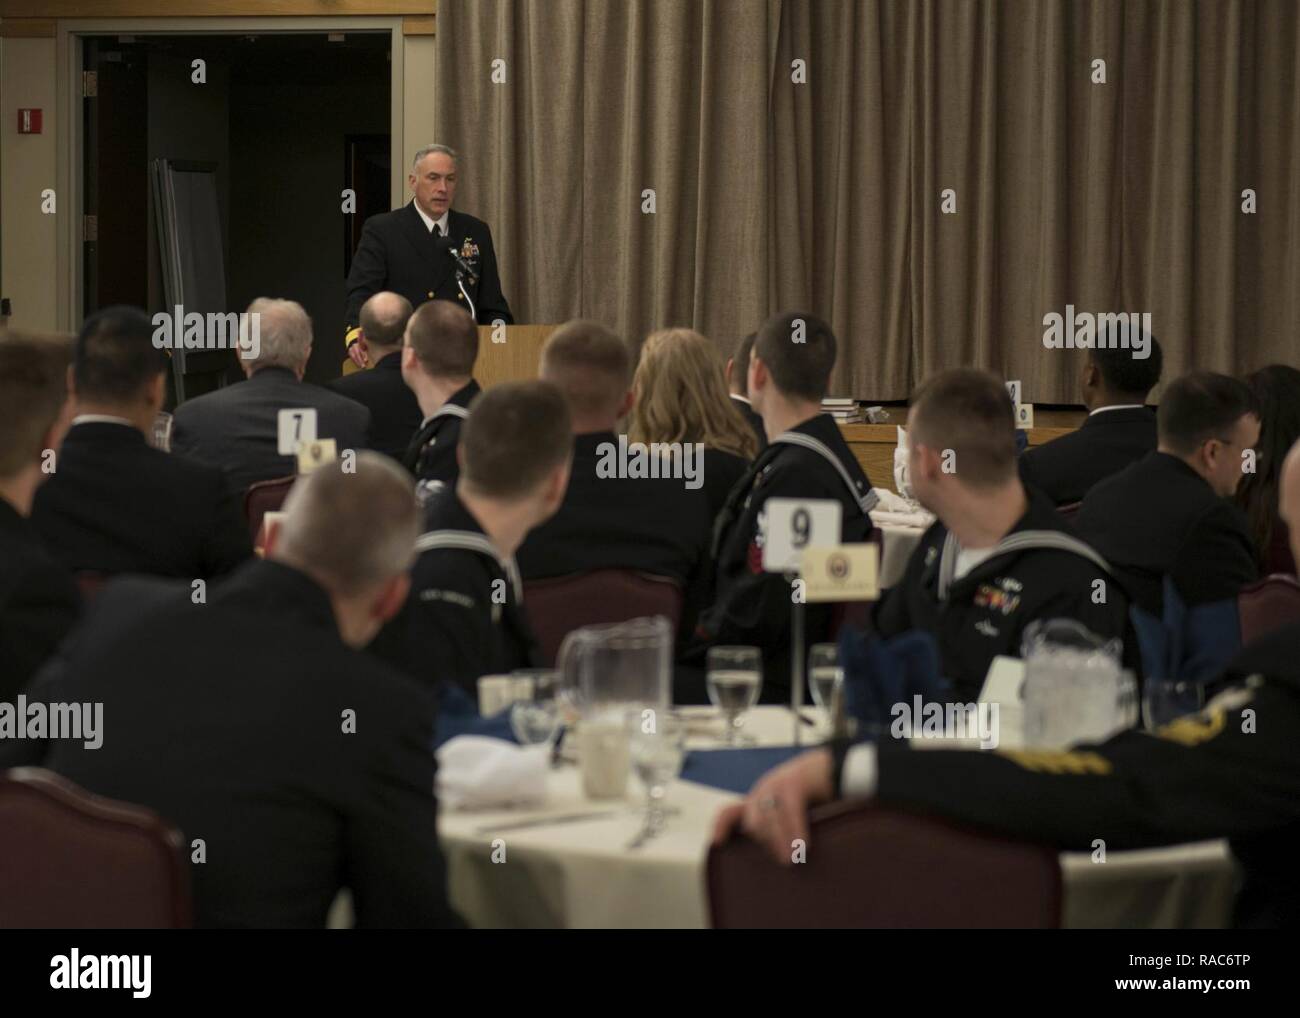 BANGOR, Wash. (Jan. 17, 2017) Rear Adm. John Tammen, commander, Submarine Group (COMSUBGRU) 9, gives remarks during the 2016 COMSUBGRU-9 Sailor of the Year luncheon.  The Sailor of the Year program began in 1972 by former Chief of Naval Operations Adm. Elmo Zumwalt to recognize outstanding Sailors around the fleet. Stock Photo